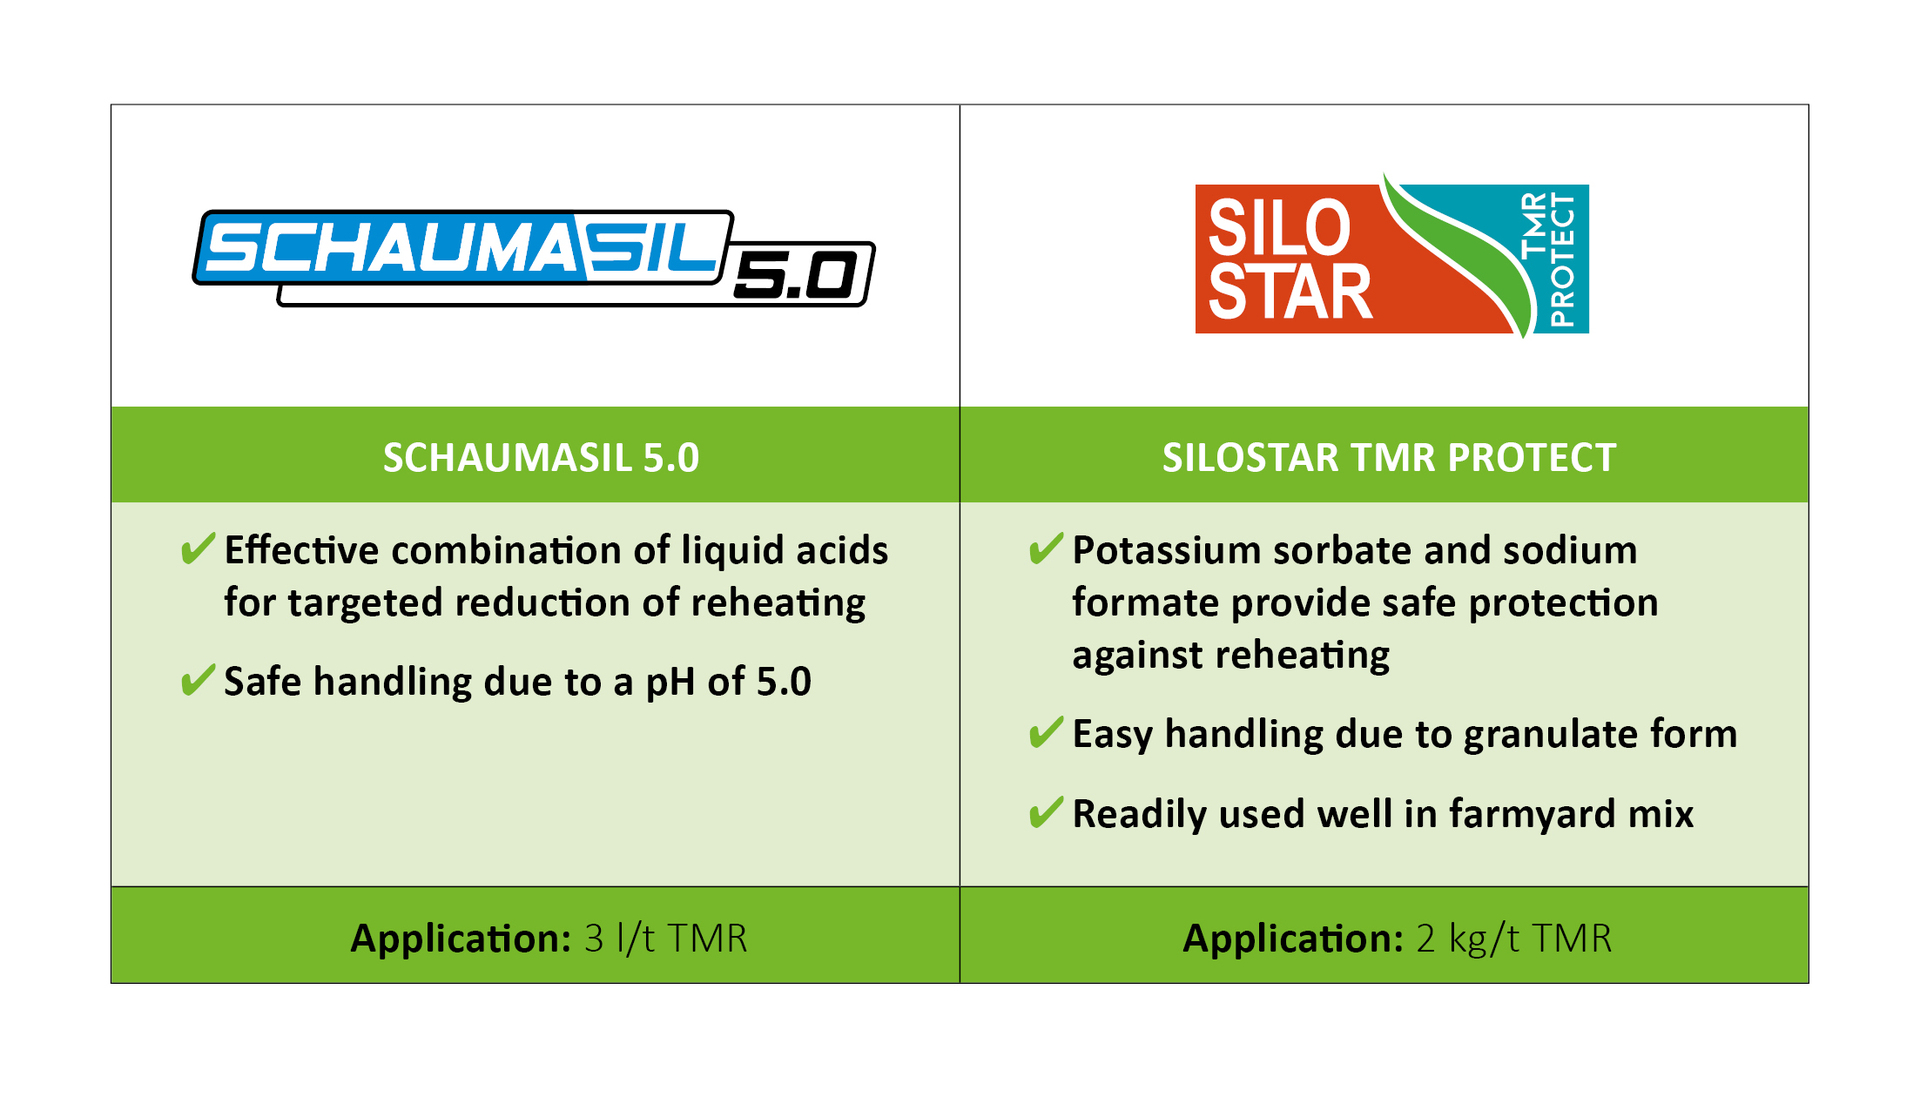 Stable rations with Schaumasil 5.0 and Silostar TMR Protect